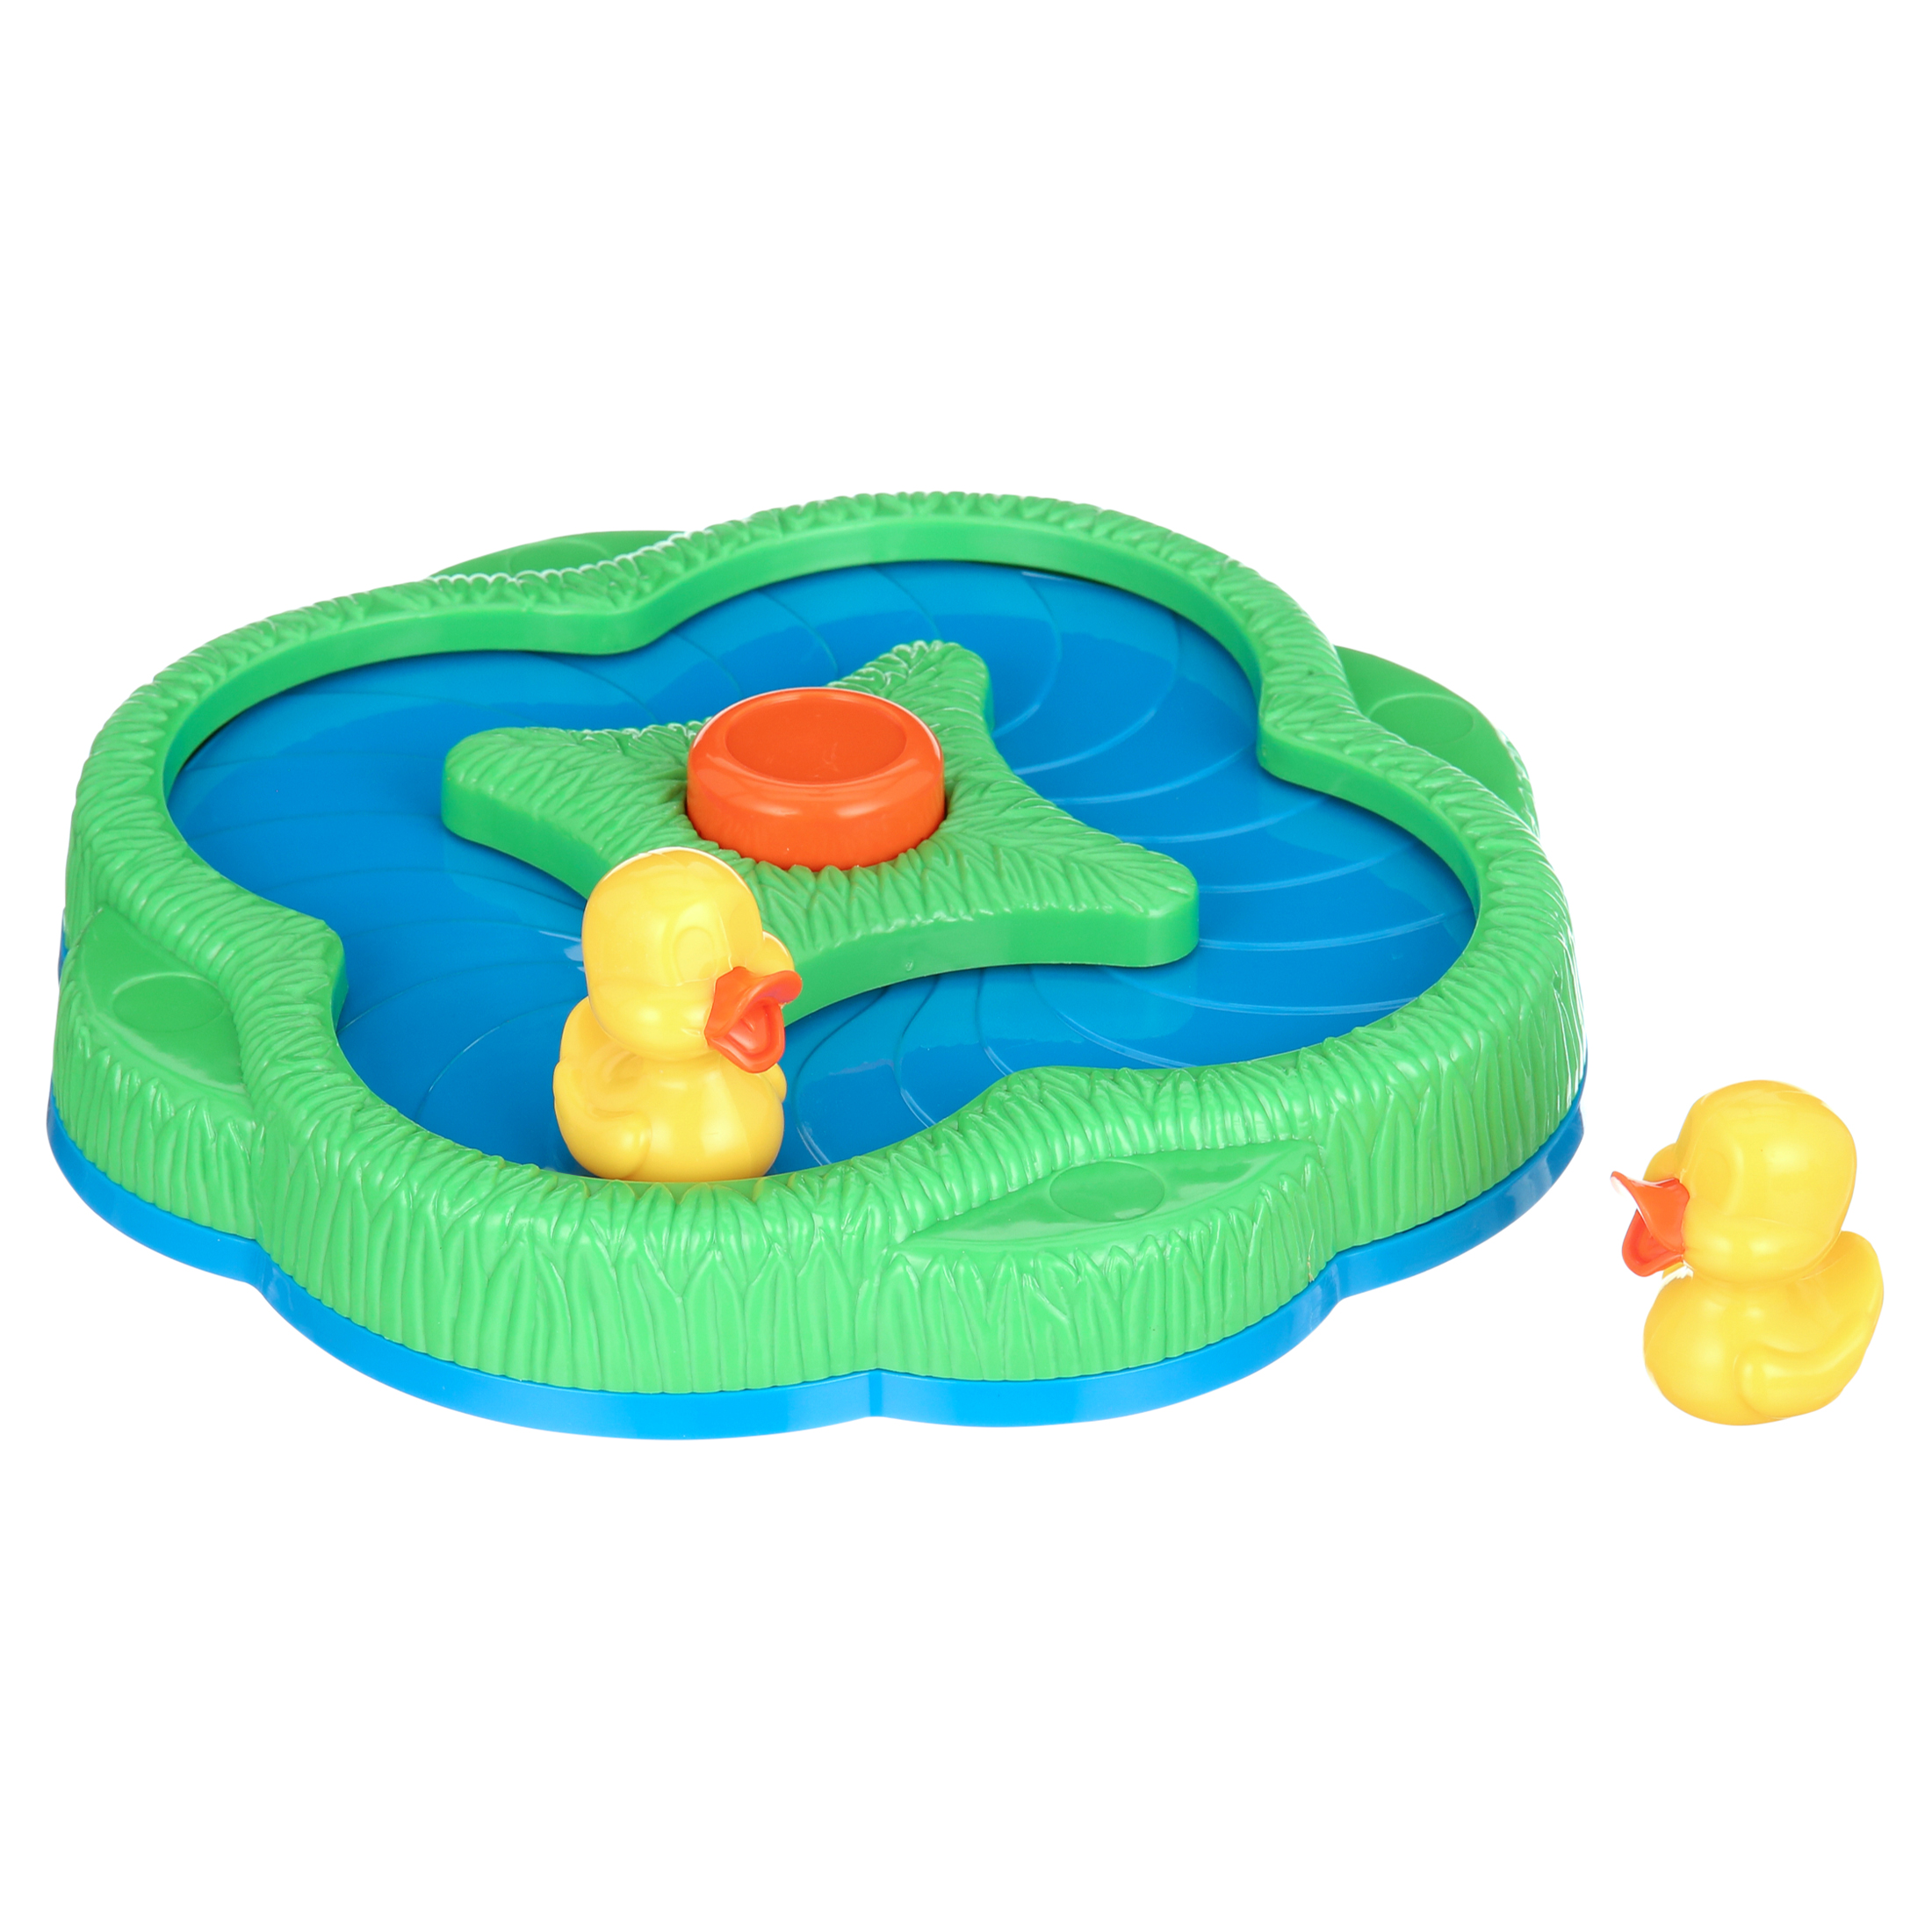 Pressman Toy Lucky Ducks Game for Kids Ages 3 and up - image 6 of 7